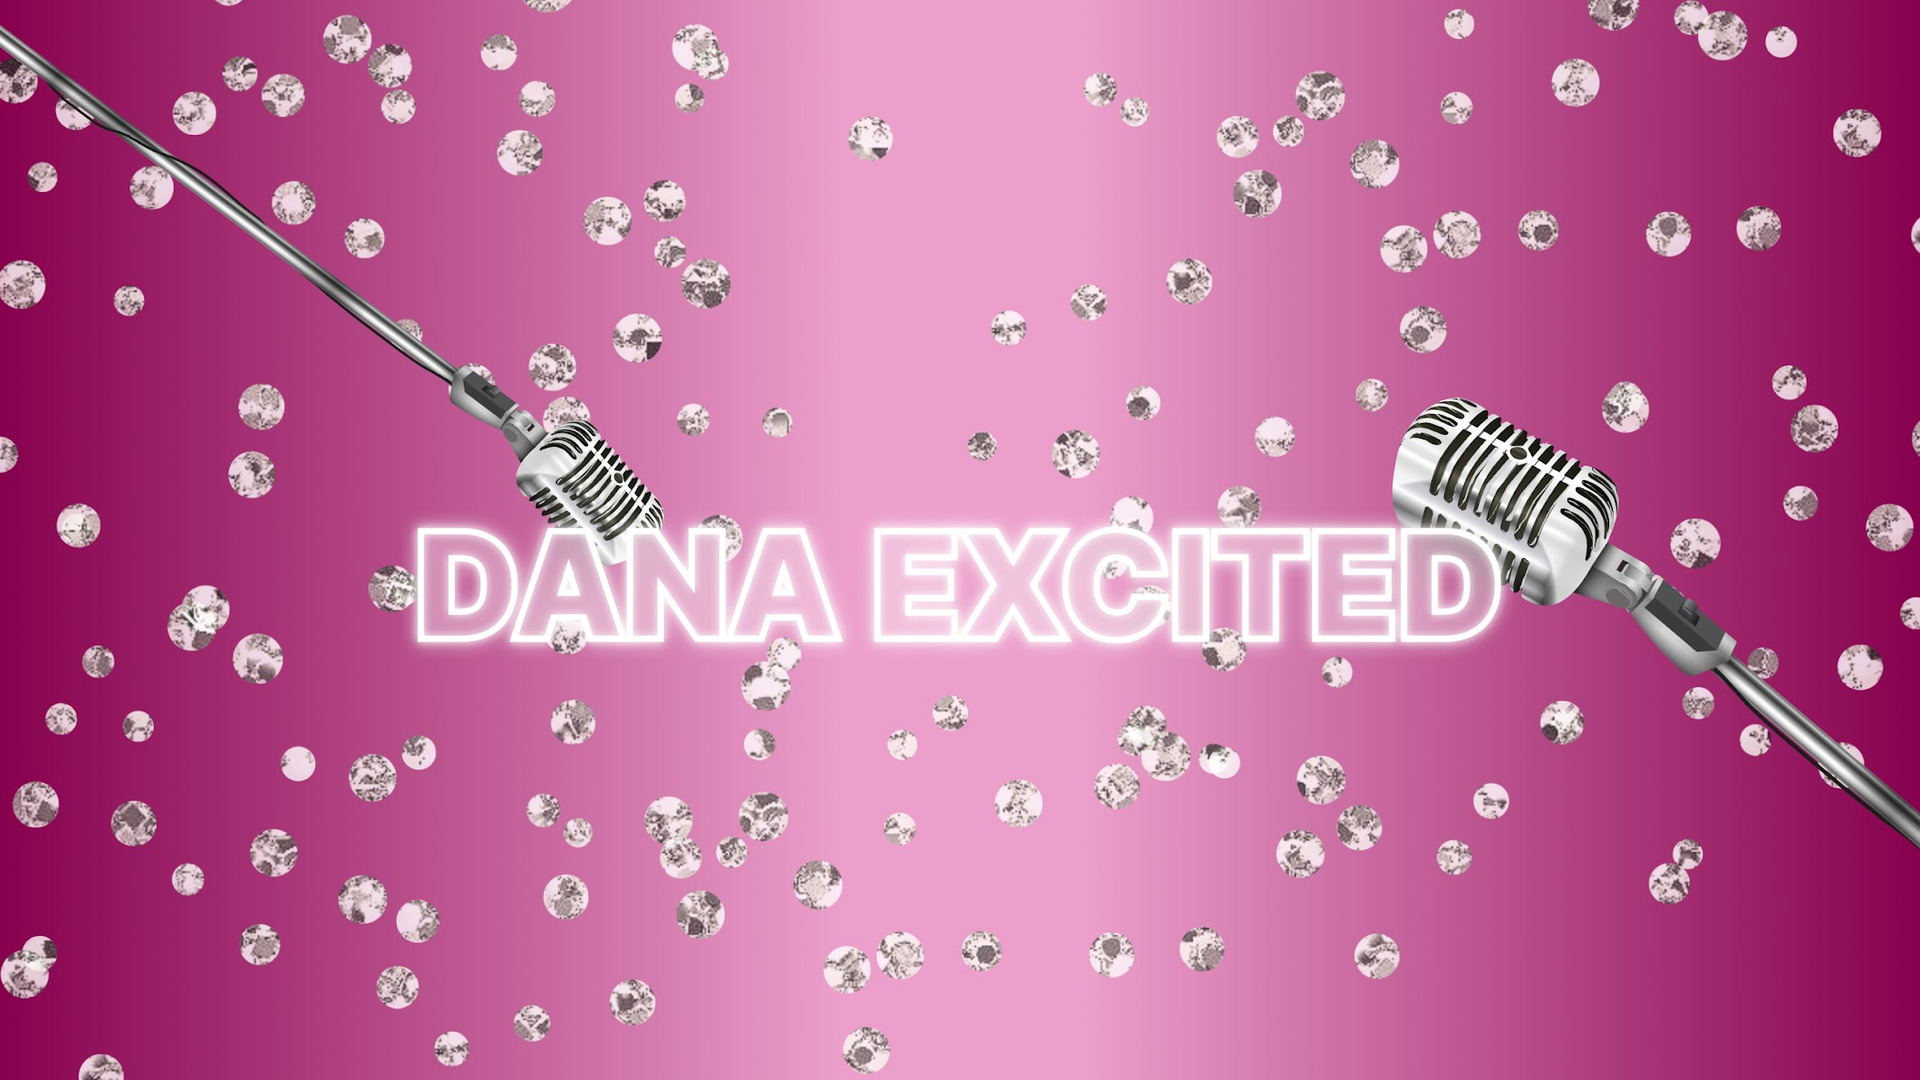 Show Dana Excited